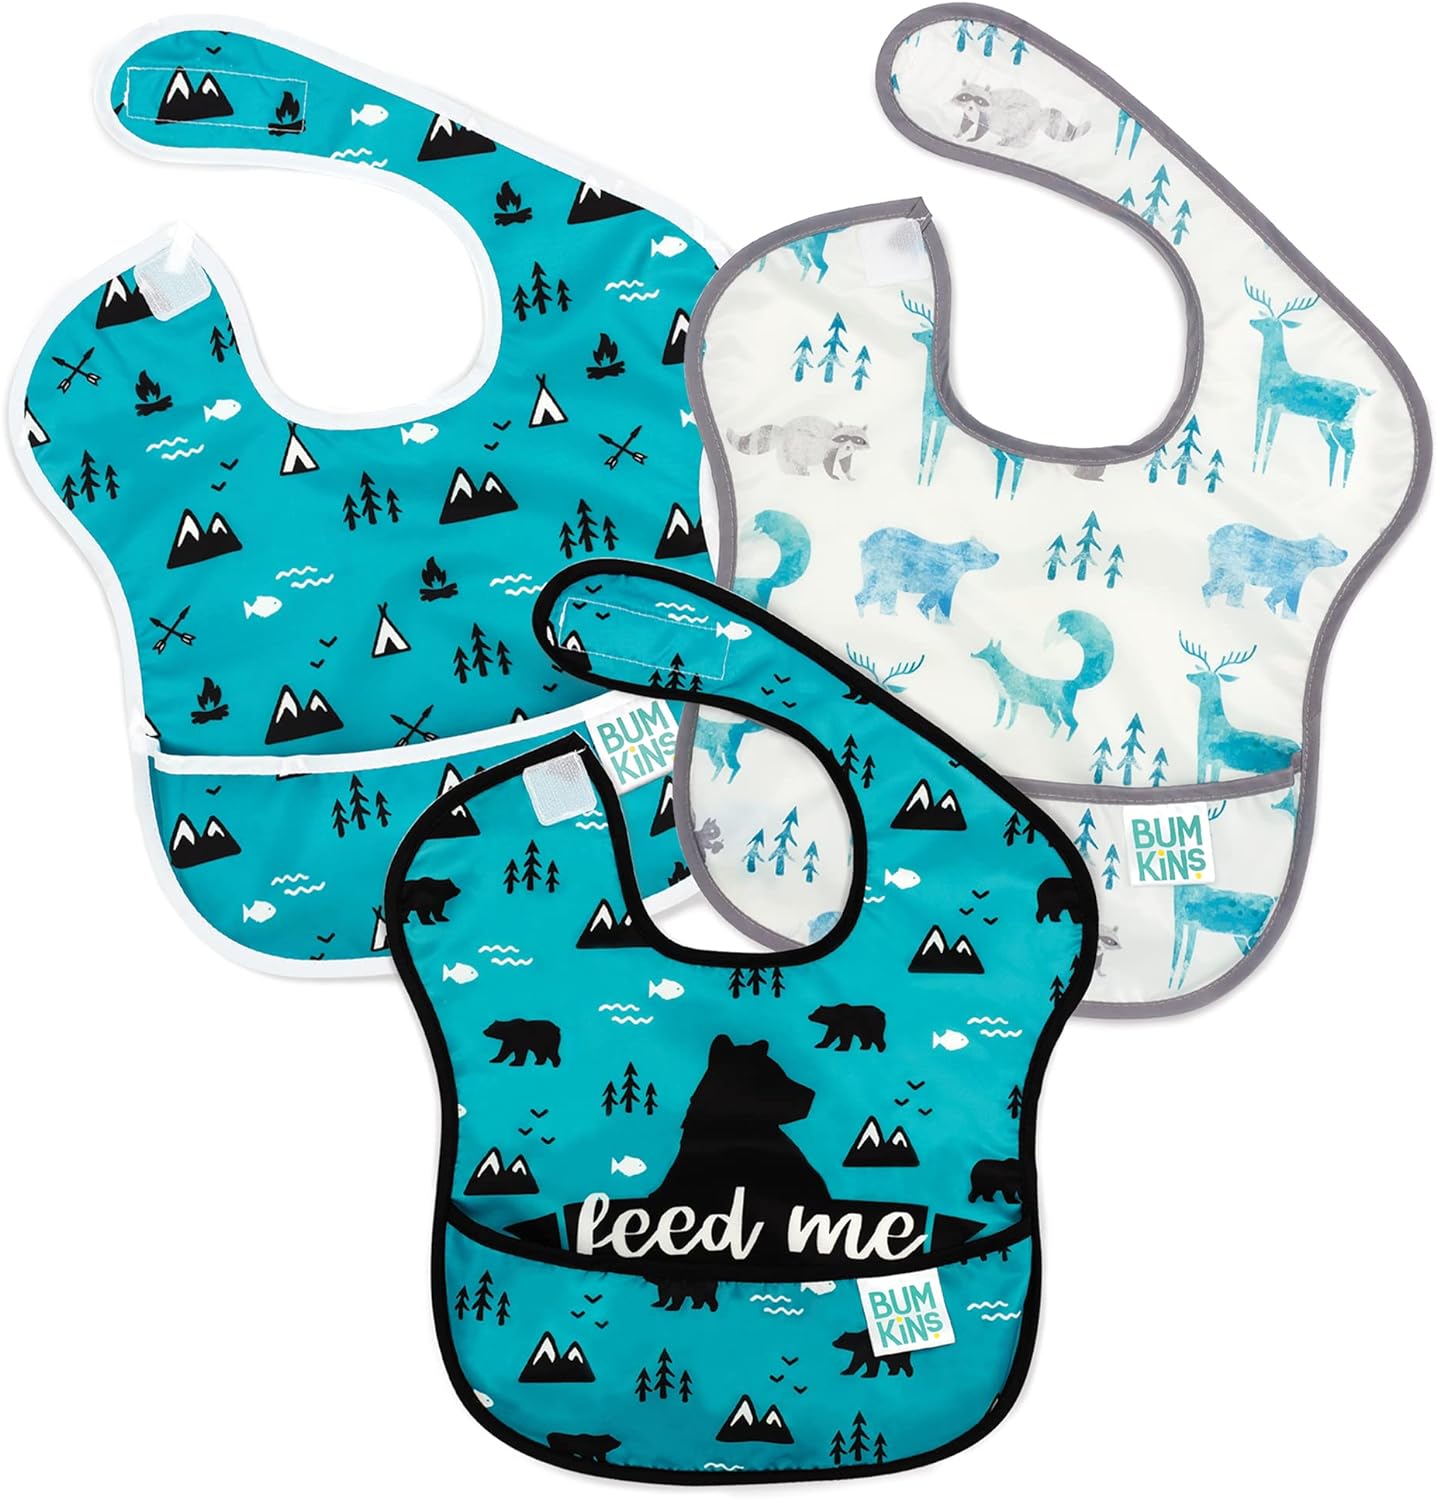 Bumkins Bibs for Girl or Boy, SuperBib Baby and Toddler for 6-24 Months, Essential Must Have for Eating, Feeding Supplies…